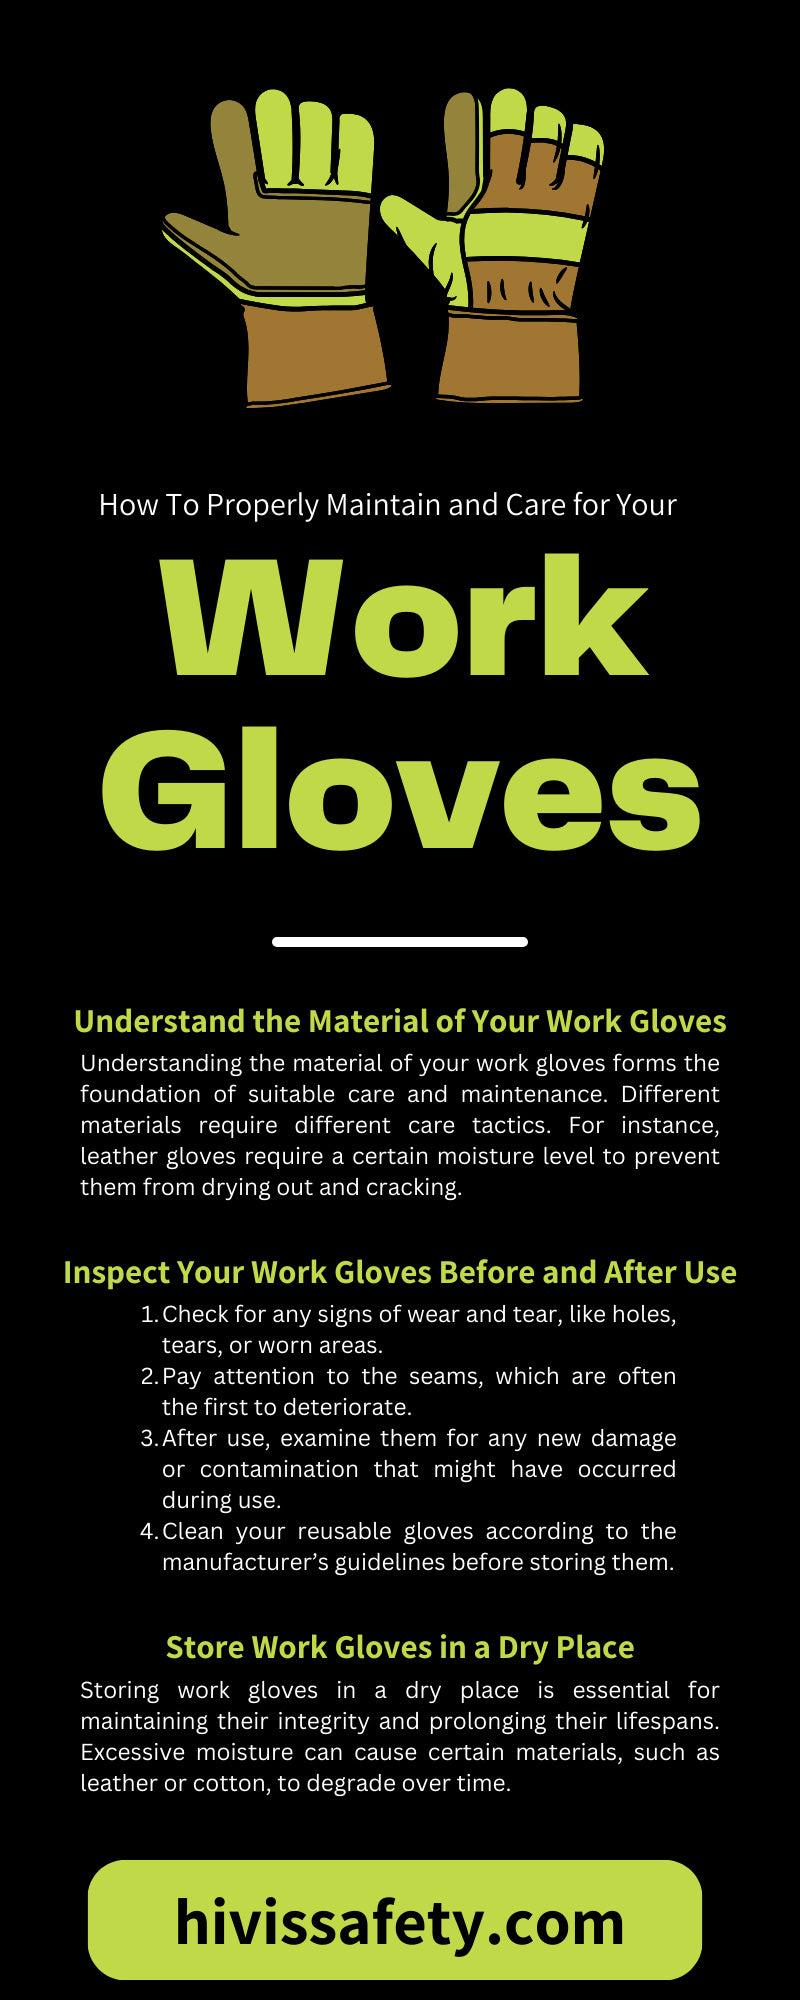 How To Properly Maintain and Care for Your Work Gloves